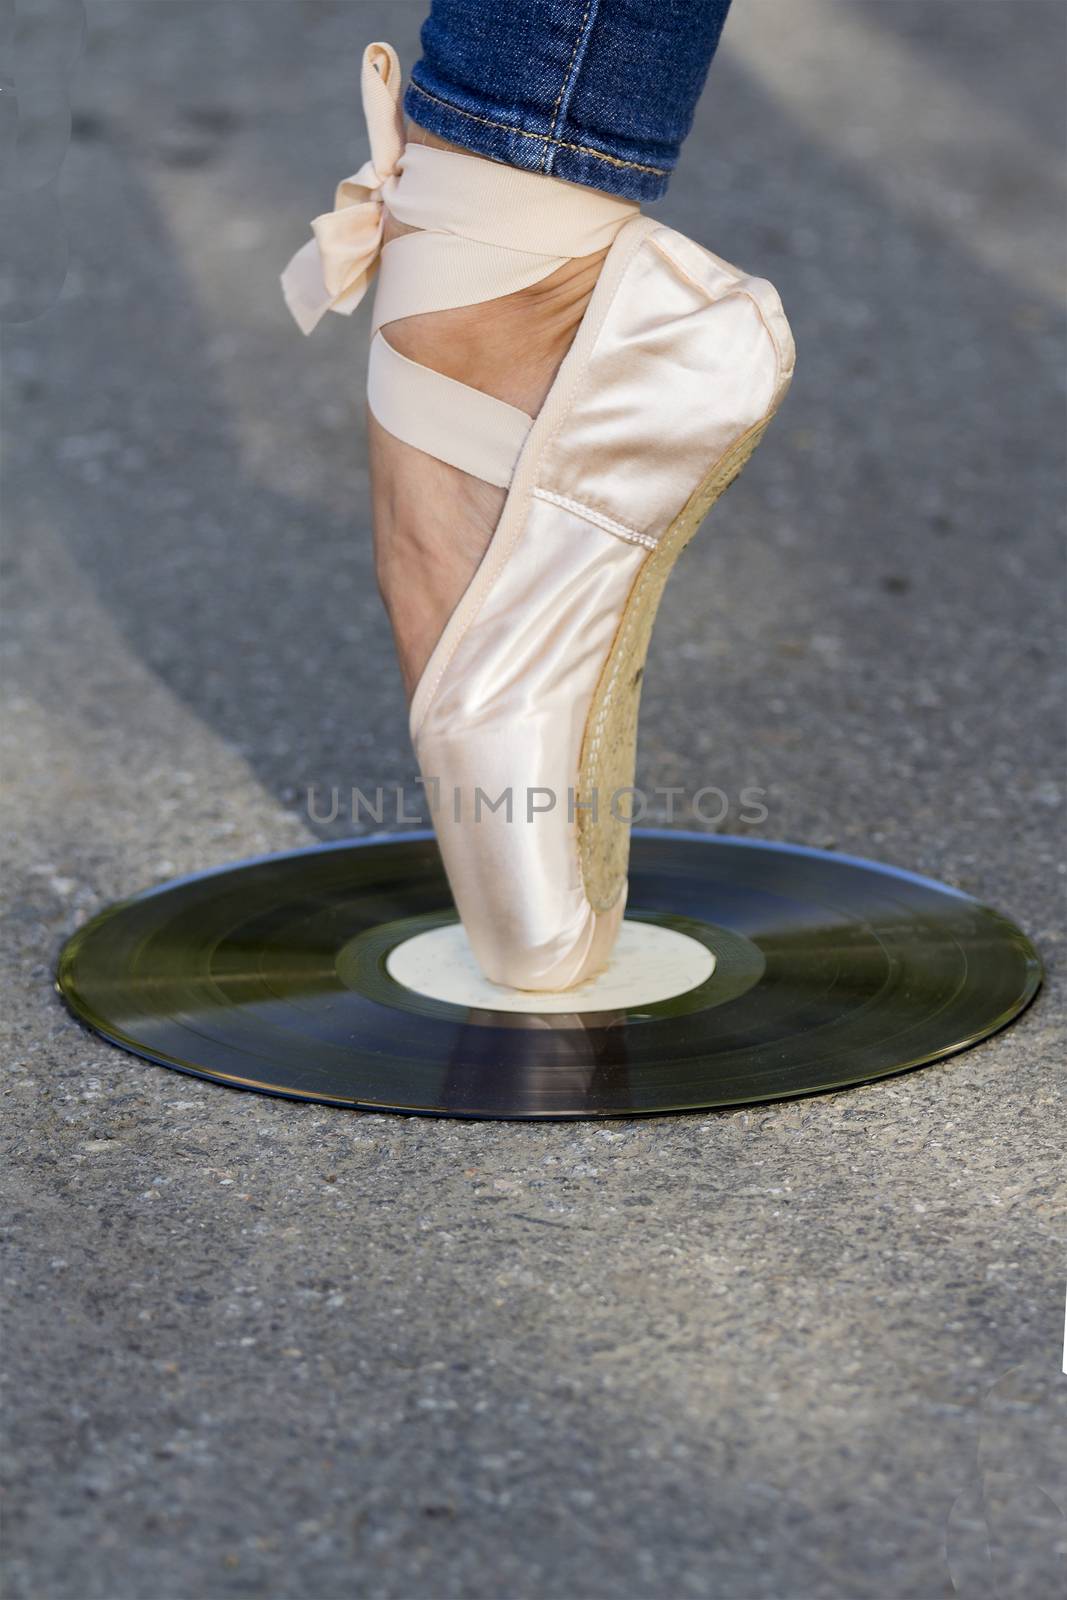 Foot girls in Ballet shoes  stands on a vinyl disc, which lies on the road.